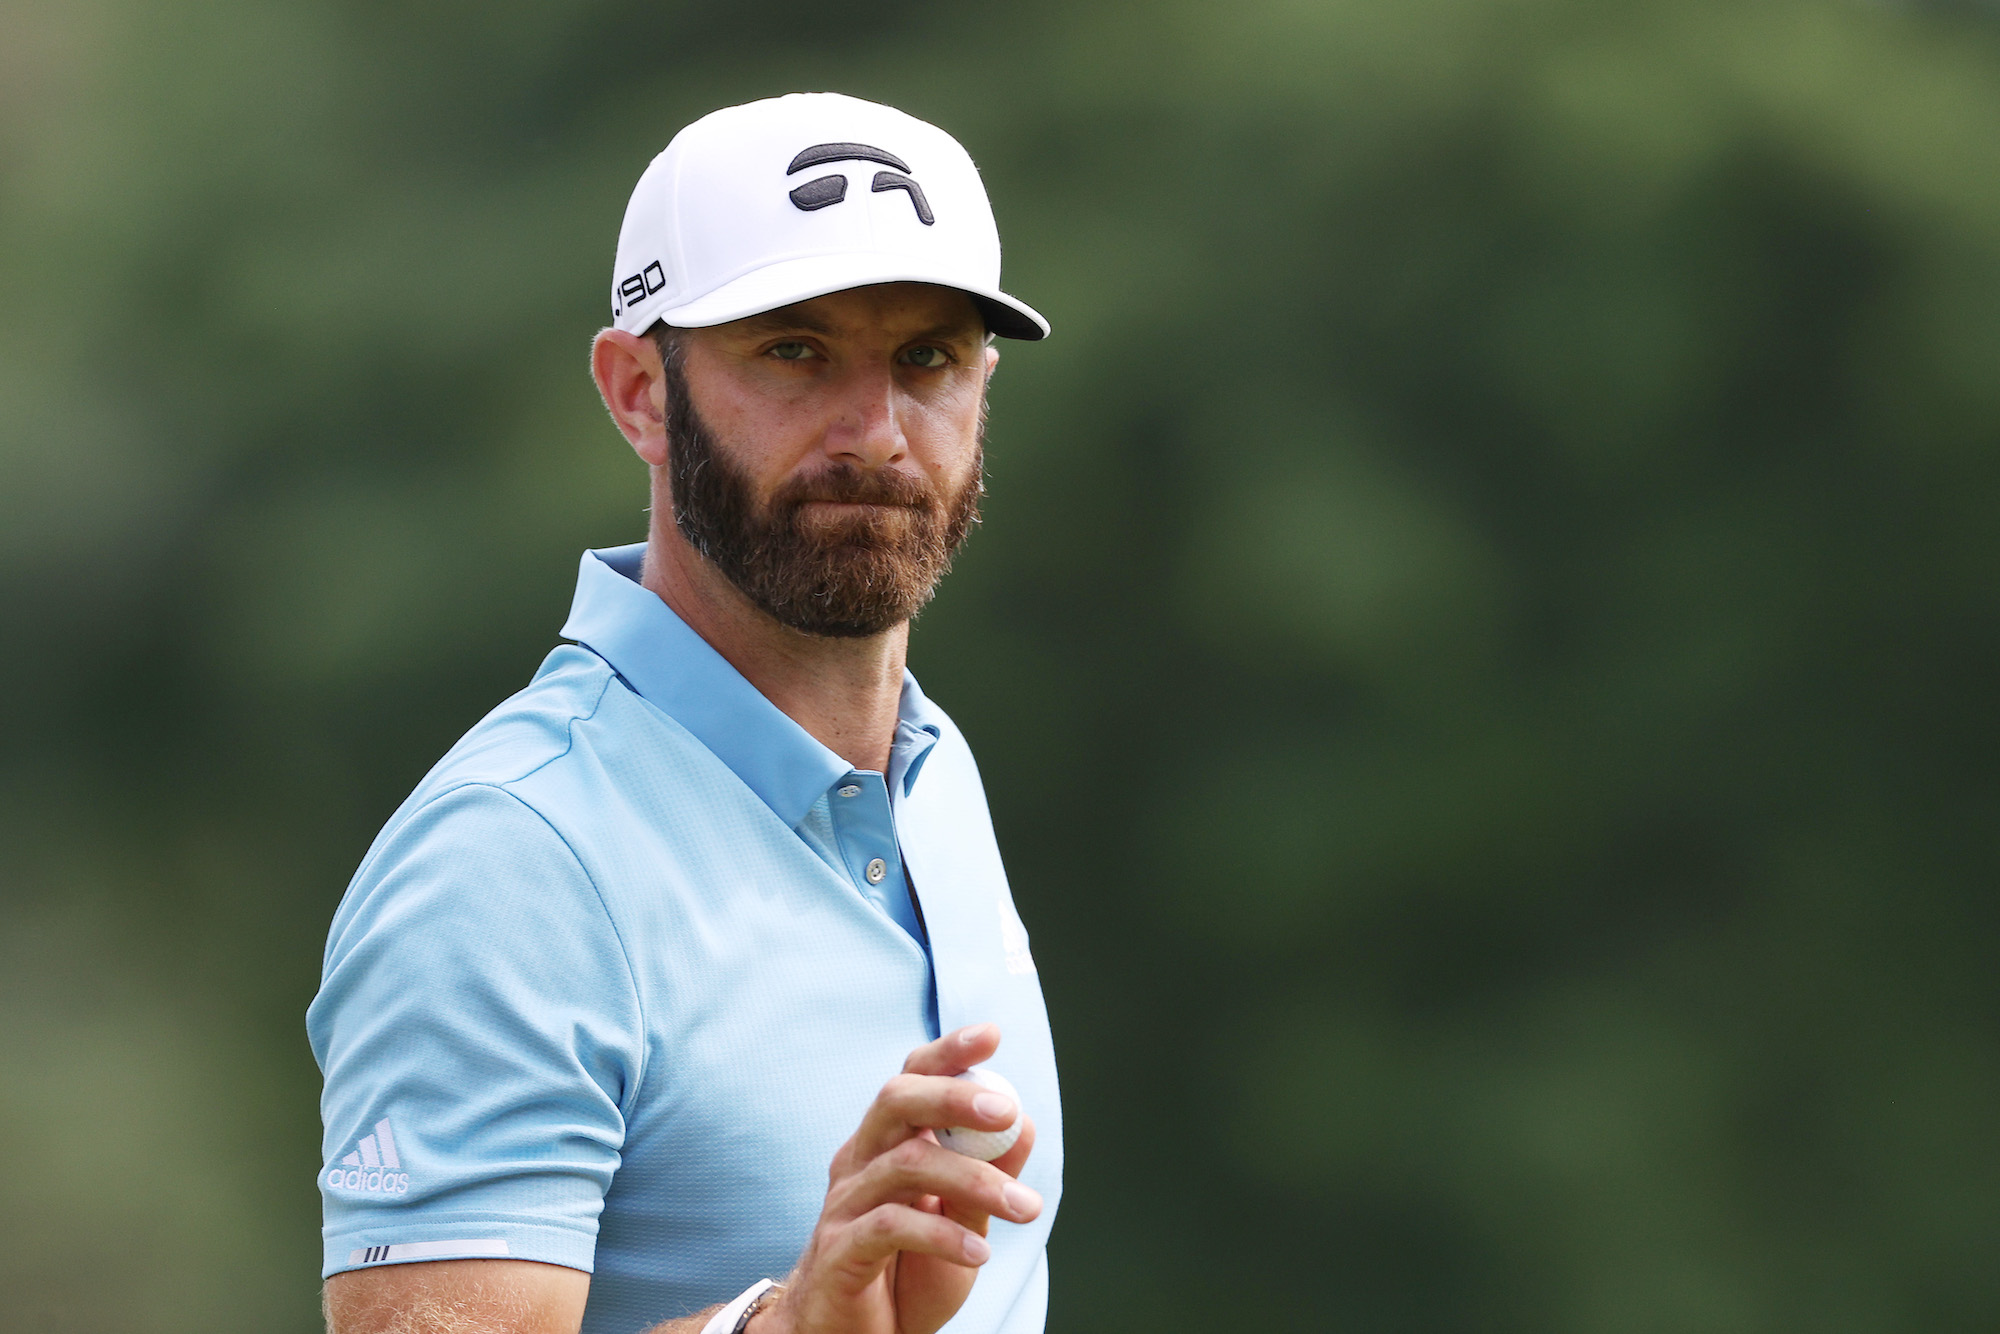 Dustin Johnson’s Biggest Mistake Is Still His Burglary of a Handgun That’d Been Used in a Murder